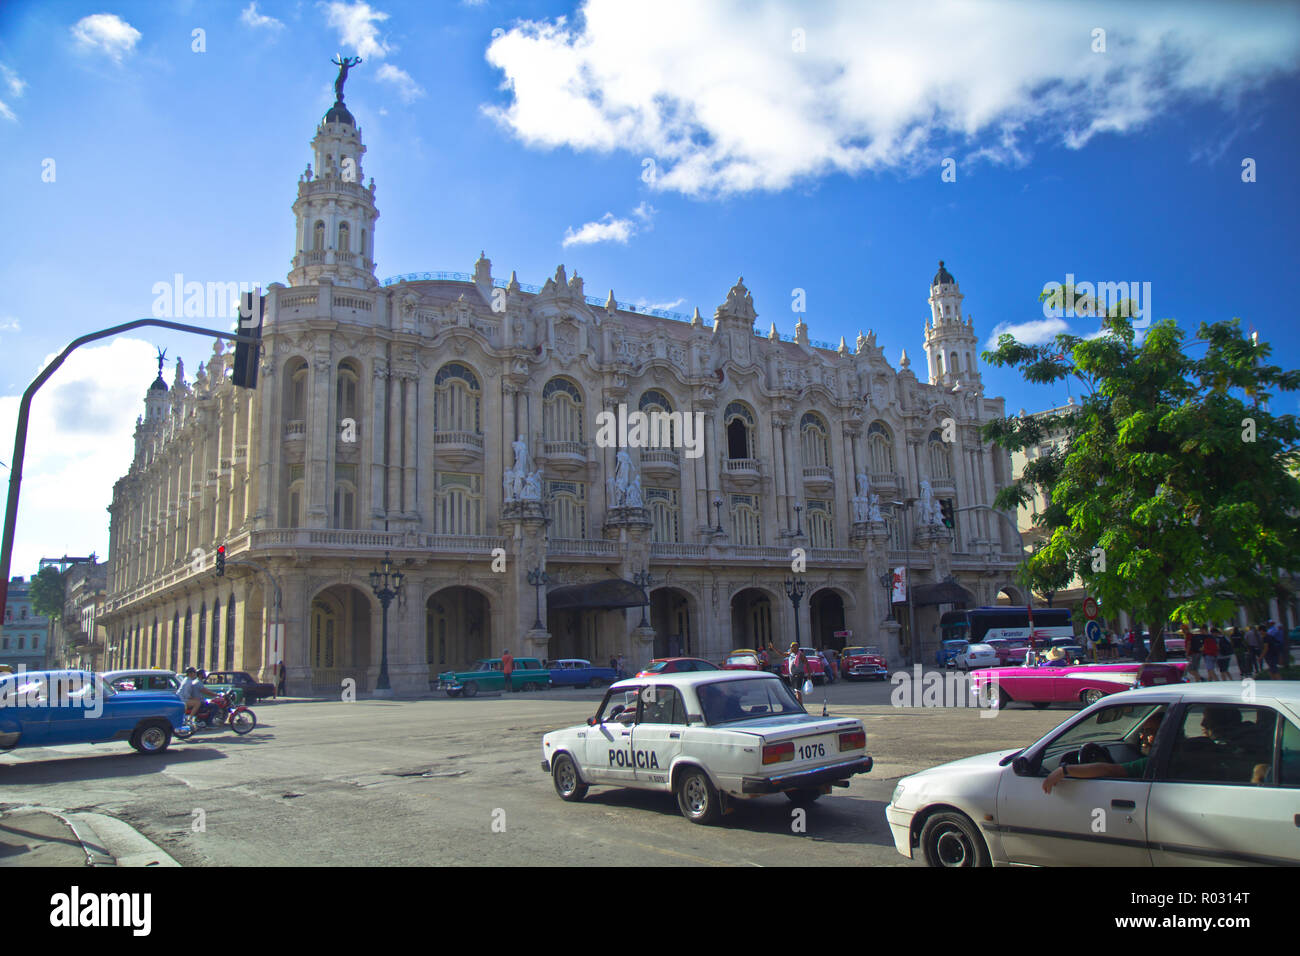 Havana is Cuba’s capital city dominated be Spanish colonial architecture.  The National Capitol Building is an iconic 1920s landmark. Classic cars ... Stock Photo